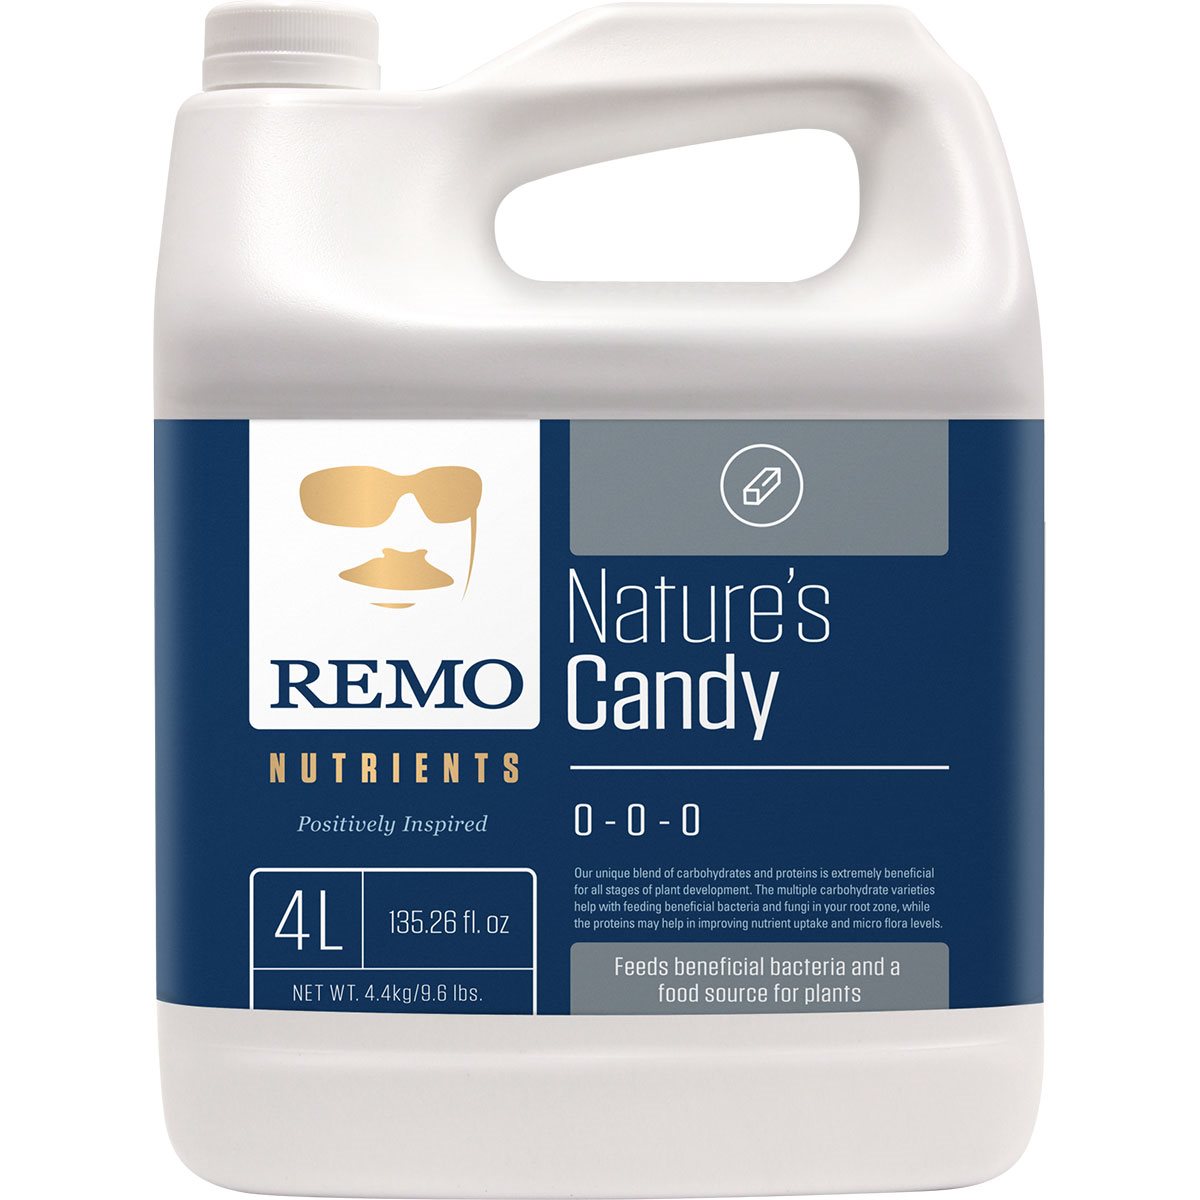 Remo Nutrients Nature's Candy - Nutrients